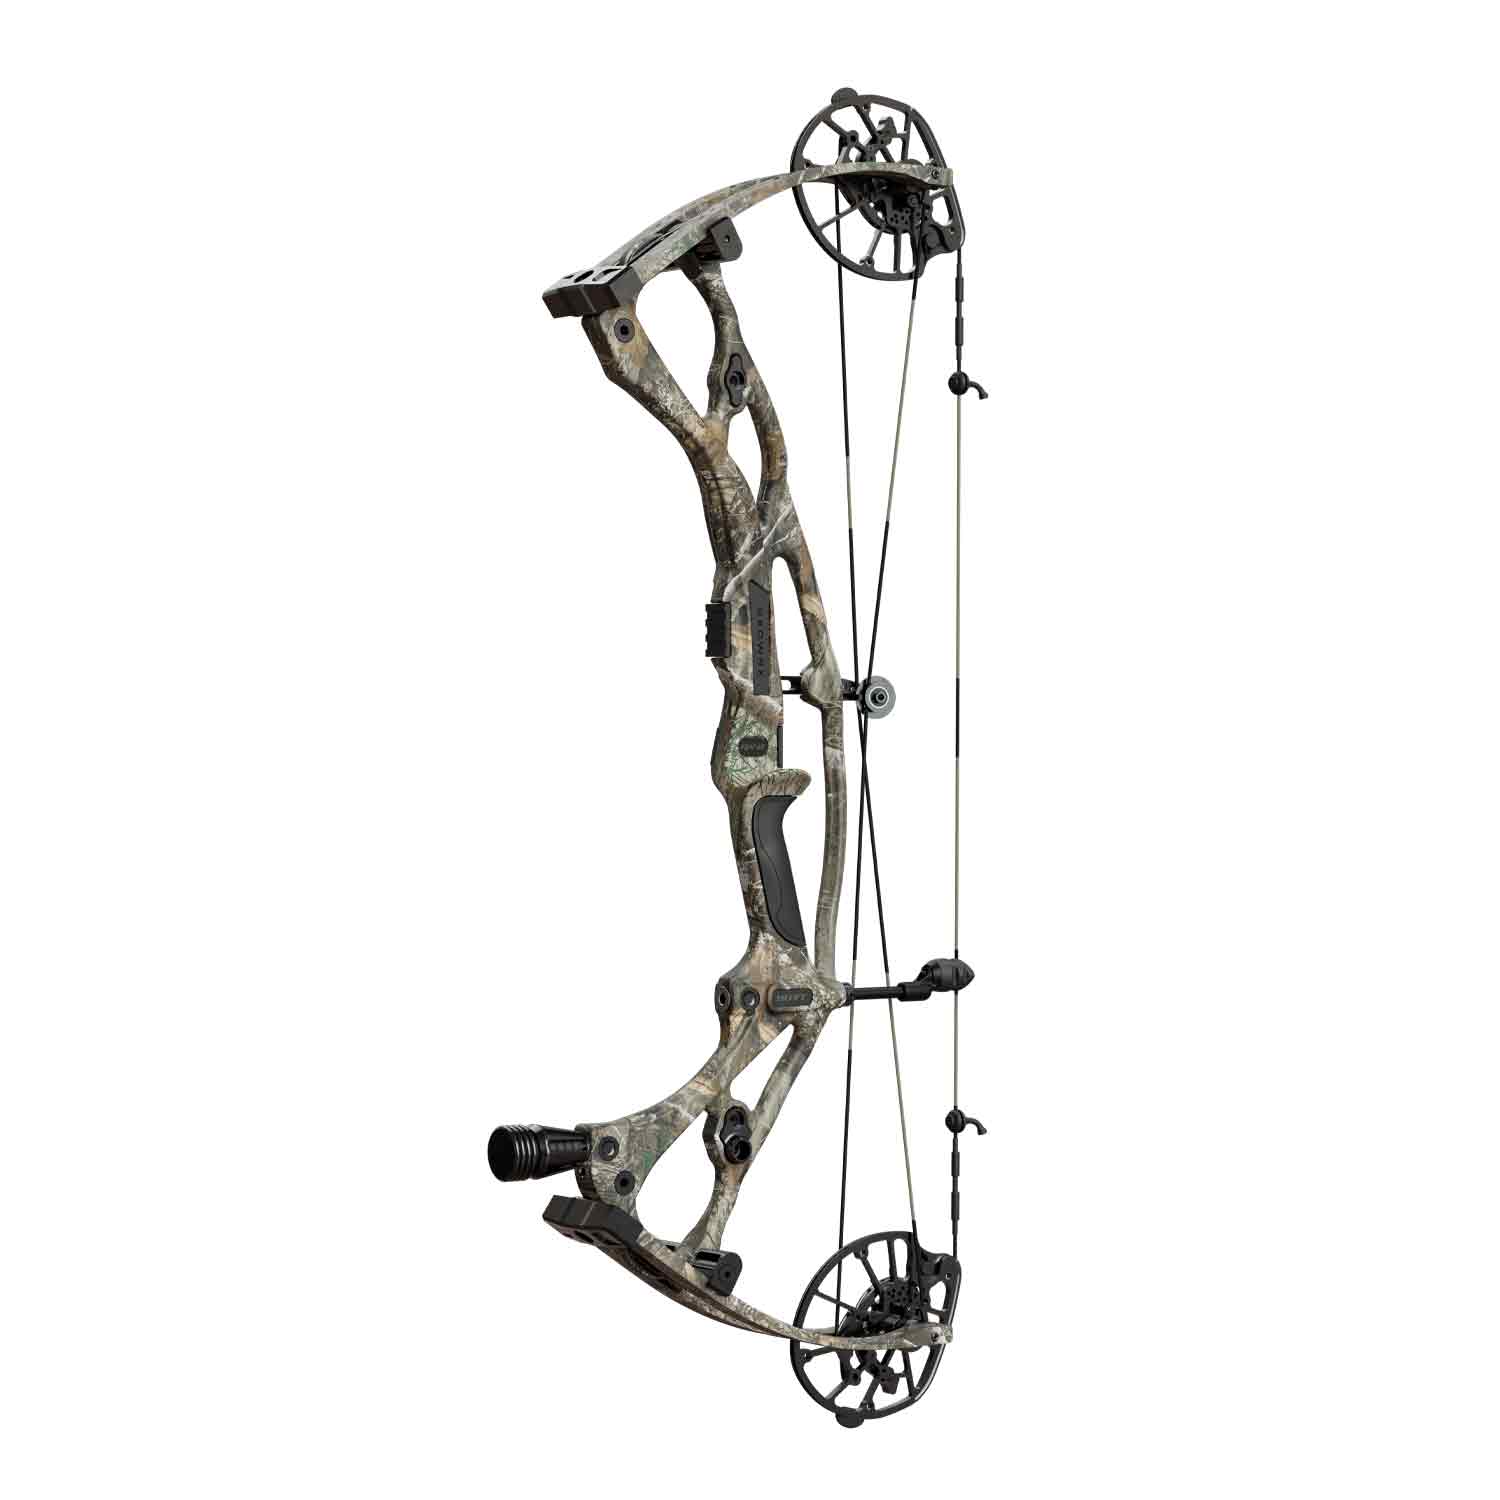 Hoyt Carbon RX-8 Compound Hunting Bow